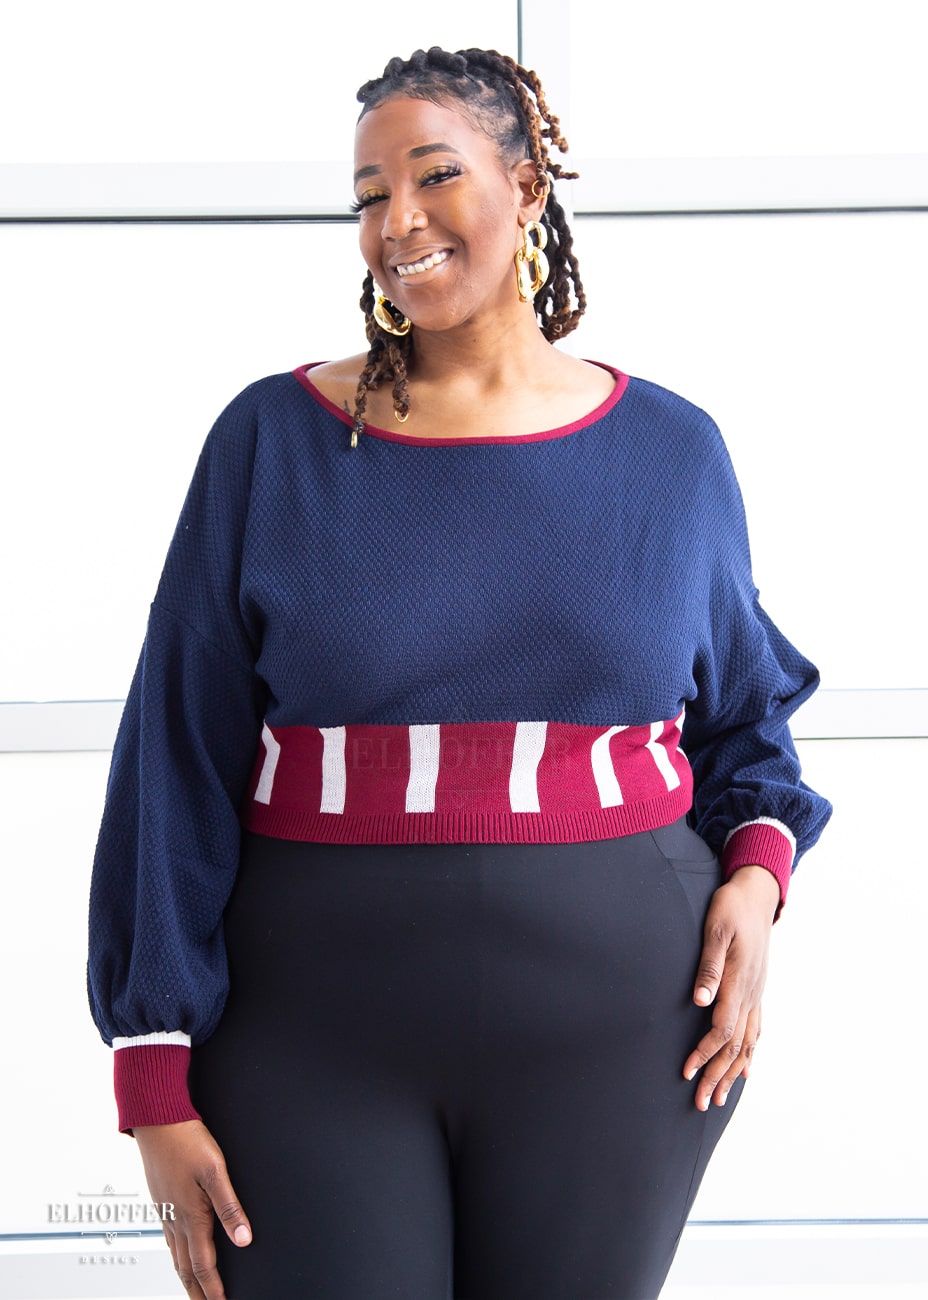 Myjah, a medium dark skinned 3xl model with shoulder length braids, is smiling while wearing the red, white and blue knit oversized crop top with bishop sleeves. The sleeves and top of the crop are blue with a waffle knit, the waist is vertical red and white stripes. The cuffs are mainly red with a white detail. There is also a red detail at the neckline.